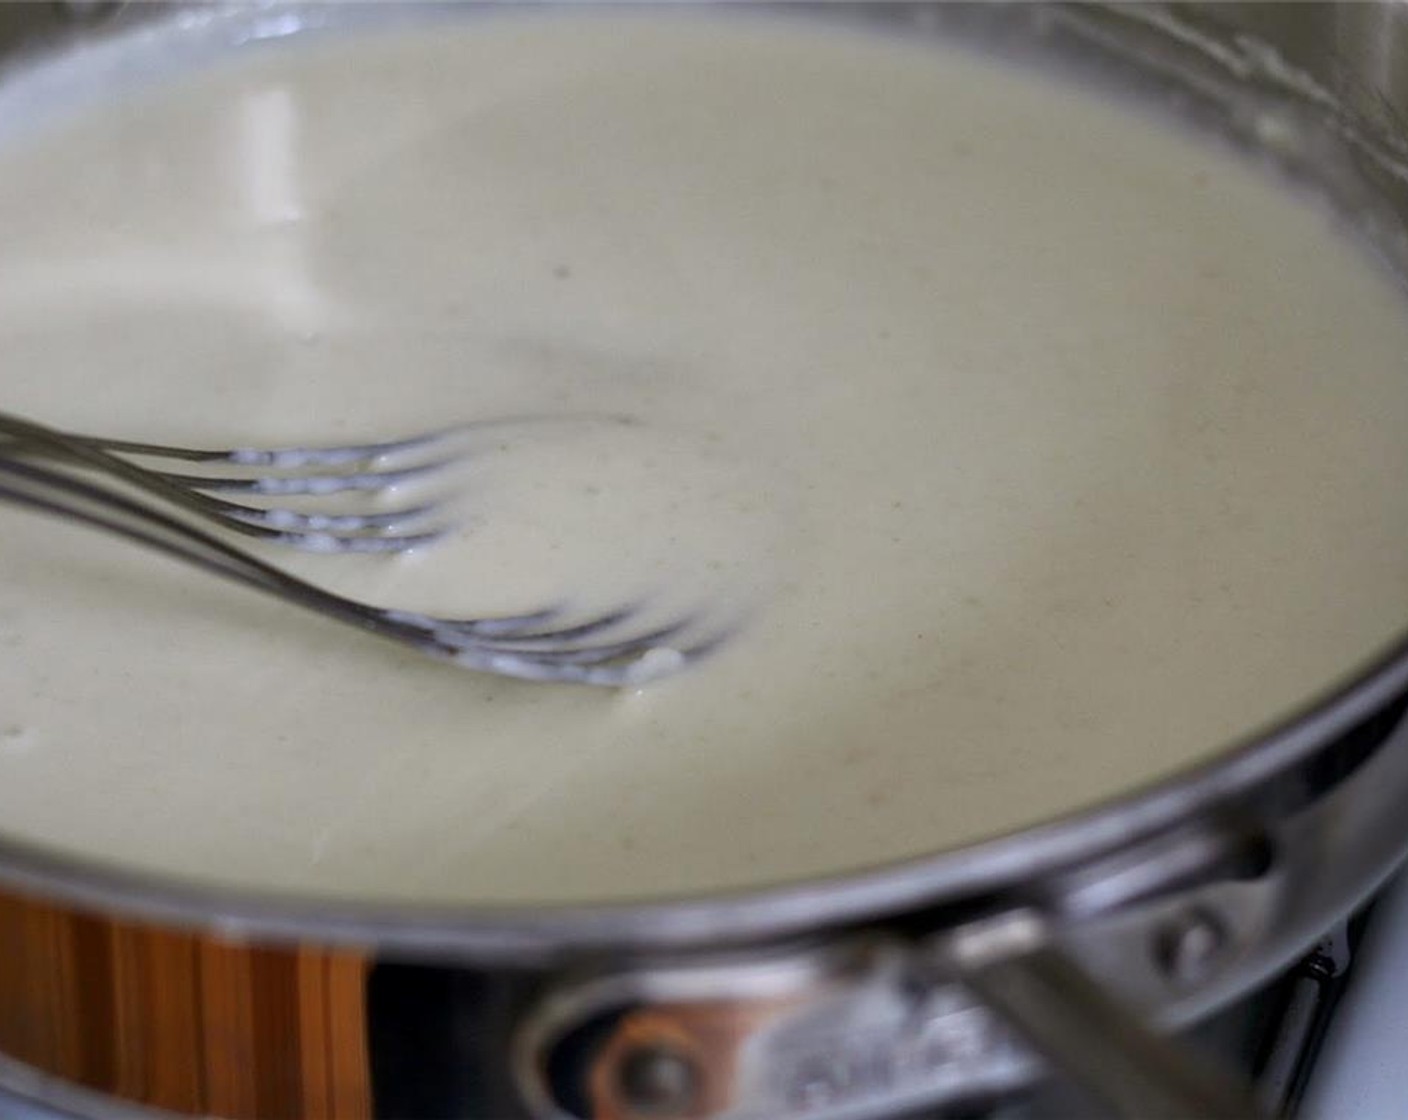 step 4 Gradually whisk in warm milk. Continue cooking, stirring often, until sauce is simmering and thickened. Let sauce bubble gently until thick, about 5-10 minutes longer, stirring often so it doesn't scorch on the bottom.